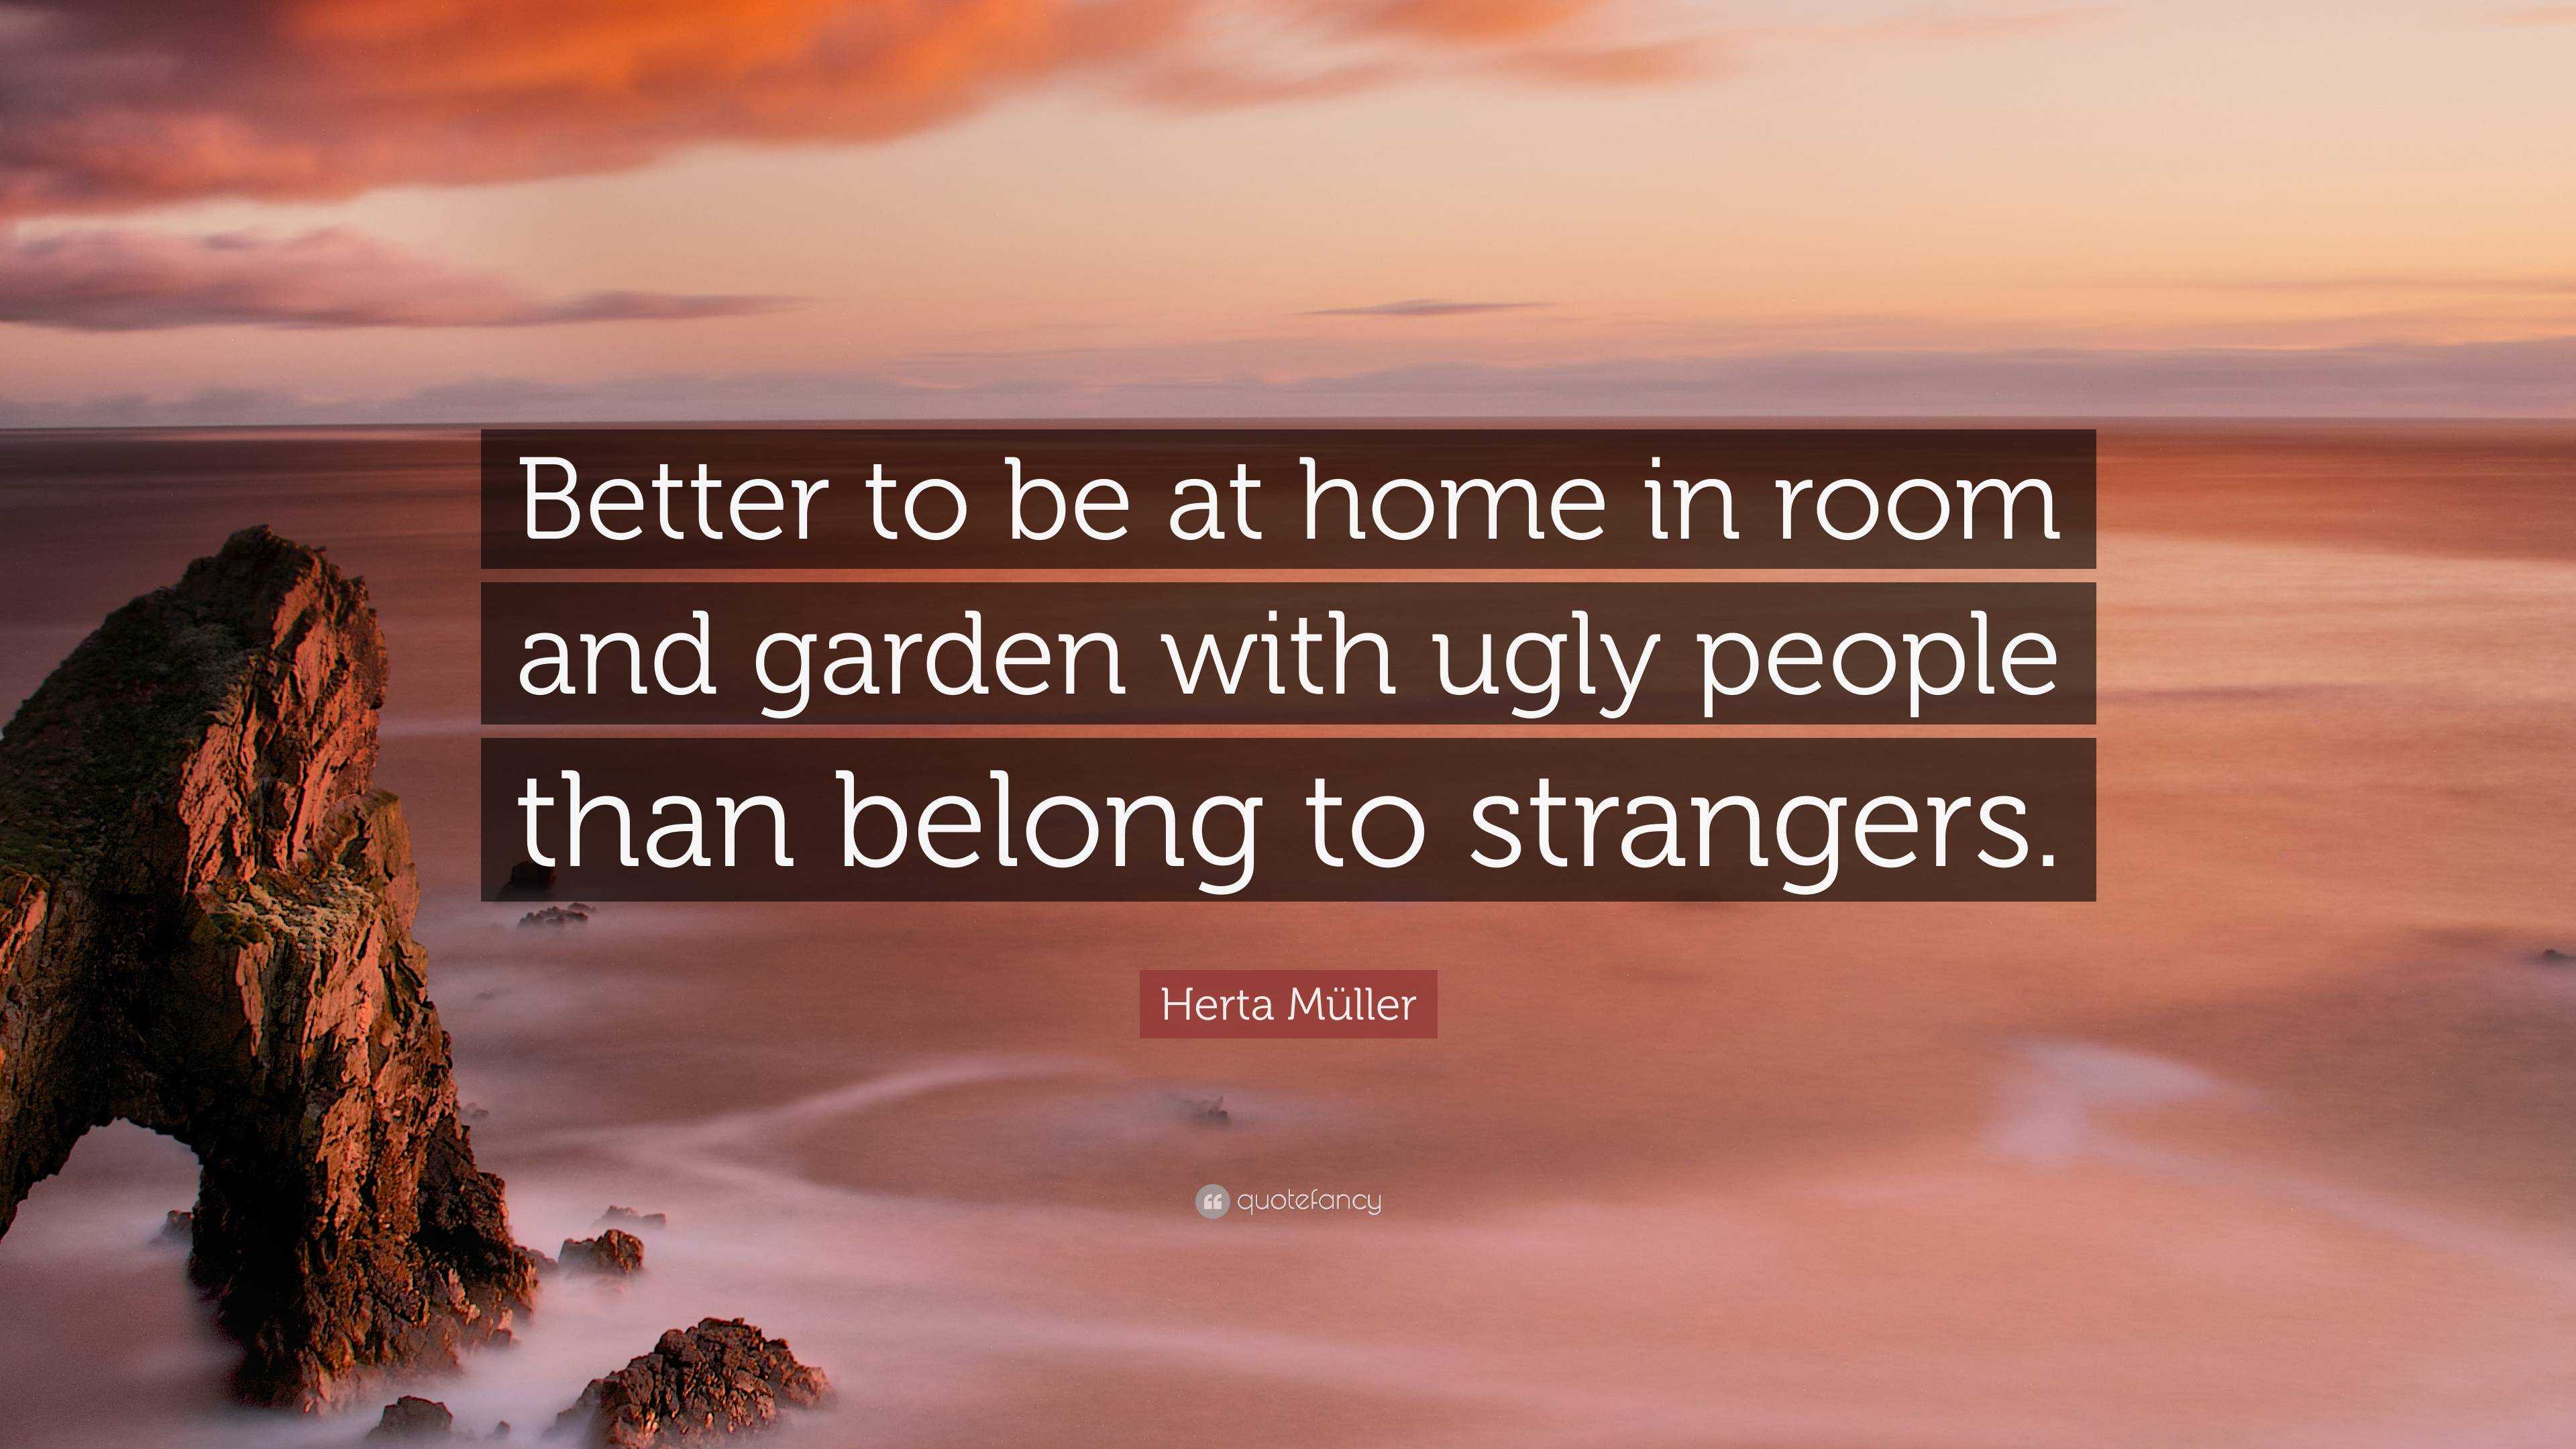 Herta Müller Quote: “Better to be at home in room and garden with ugly ...